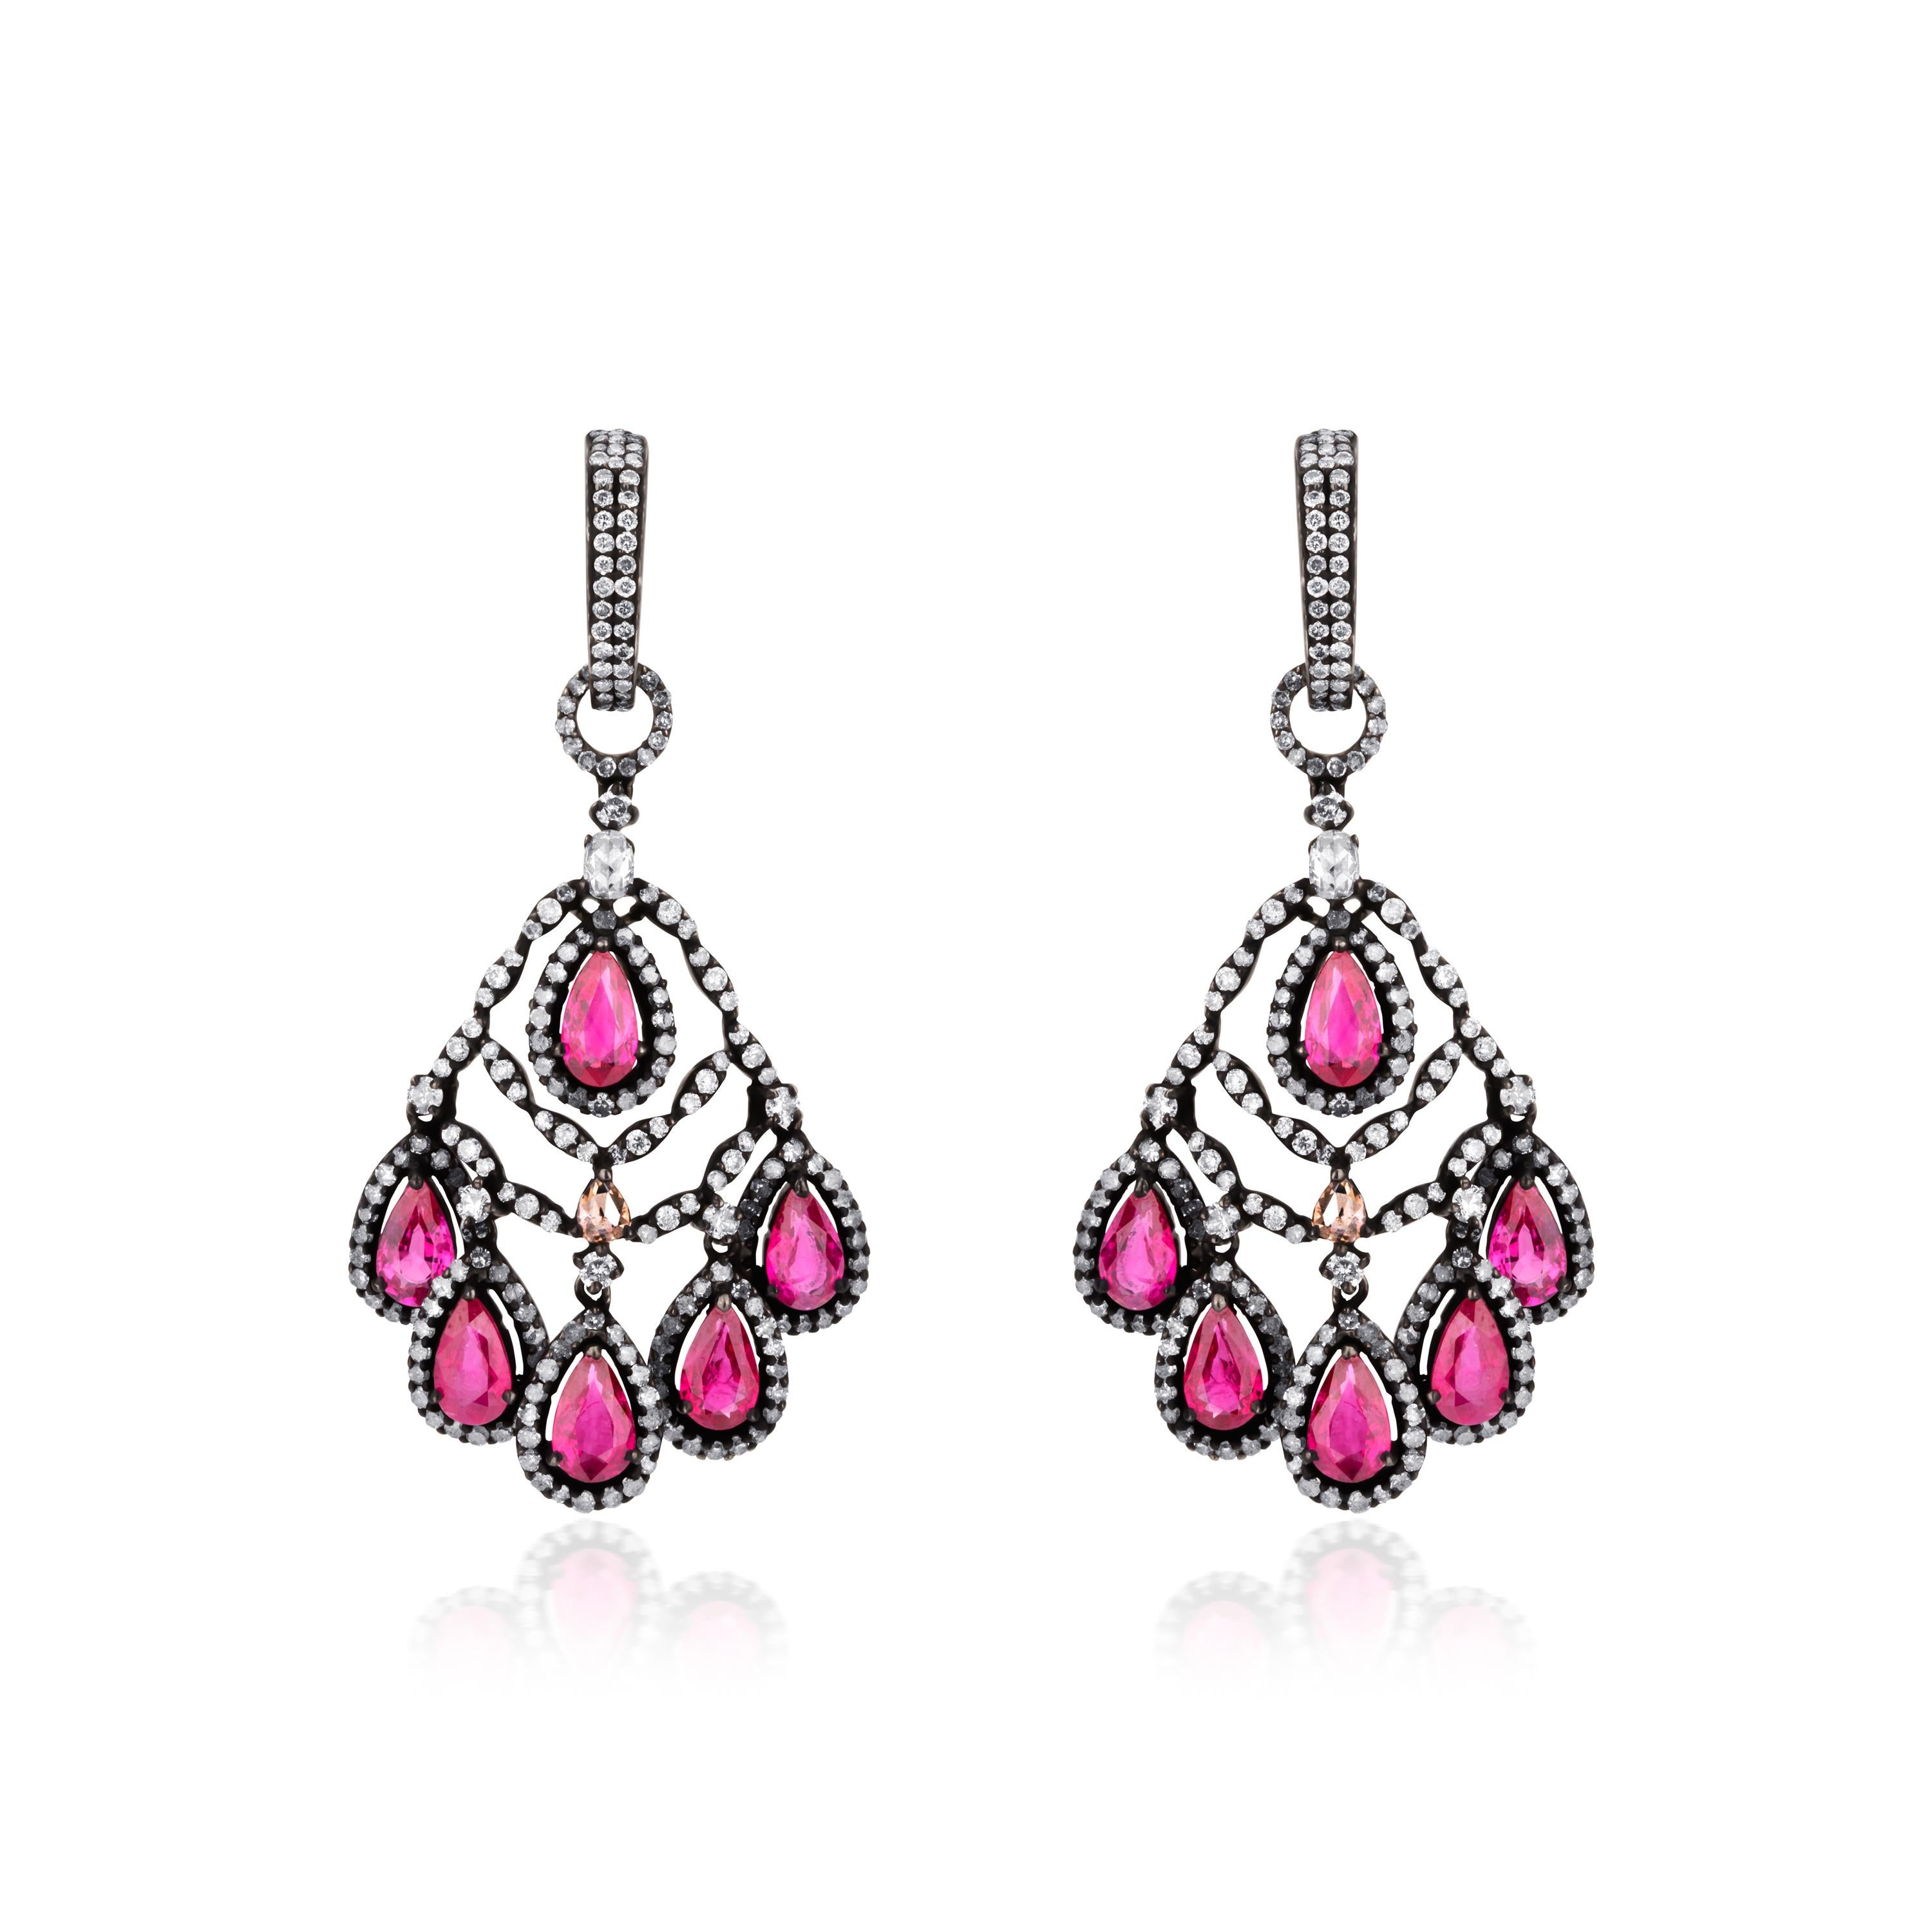 Shimmy your way with these lovely Victorian chandelier earrings. The top of the drop has curved rows of diamond from which hangs drops of pear shaped ruby. Each piece has six pear shaped rubies. The surmount is embellished with rows of round